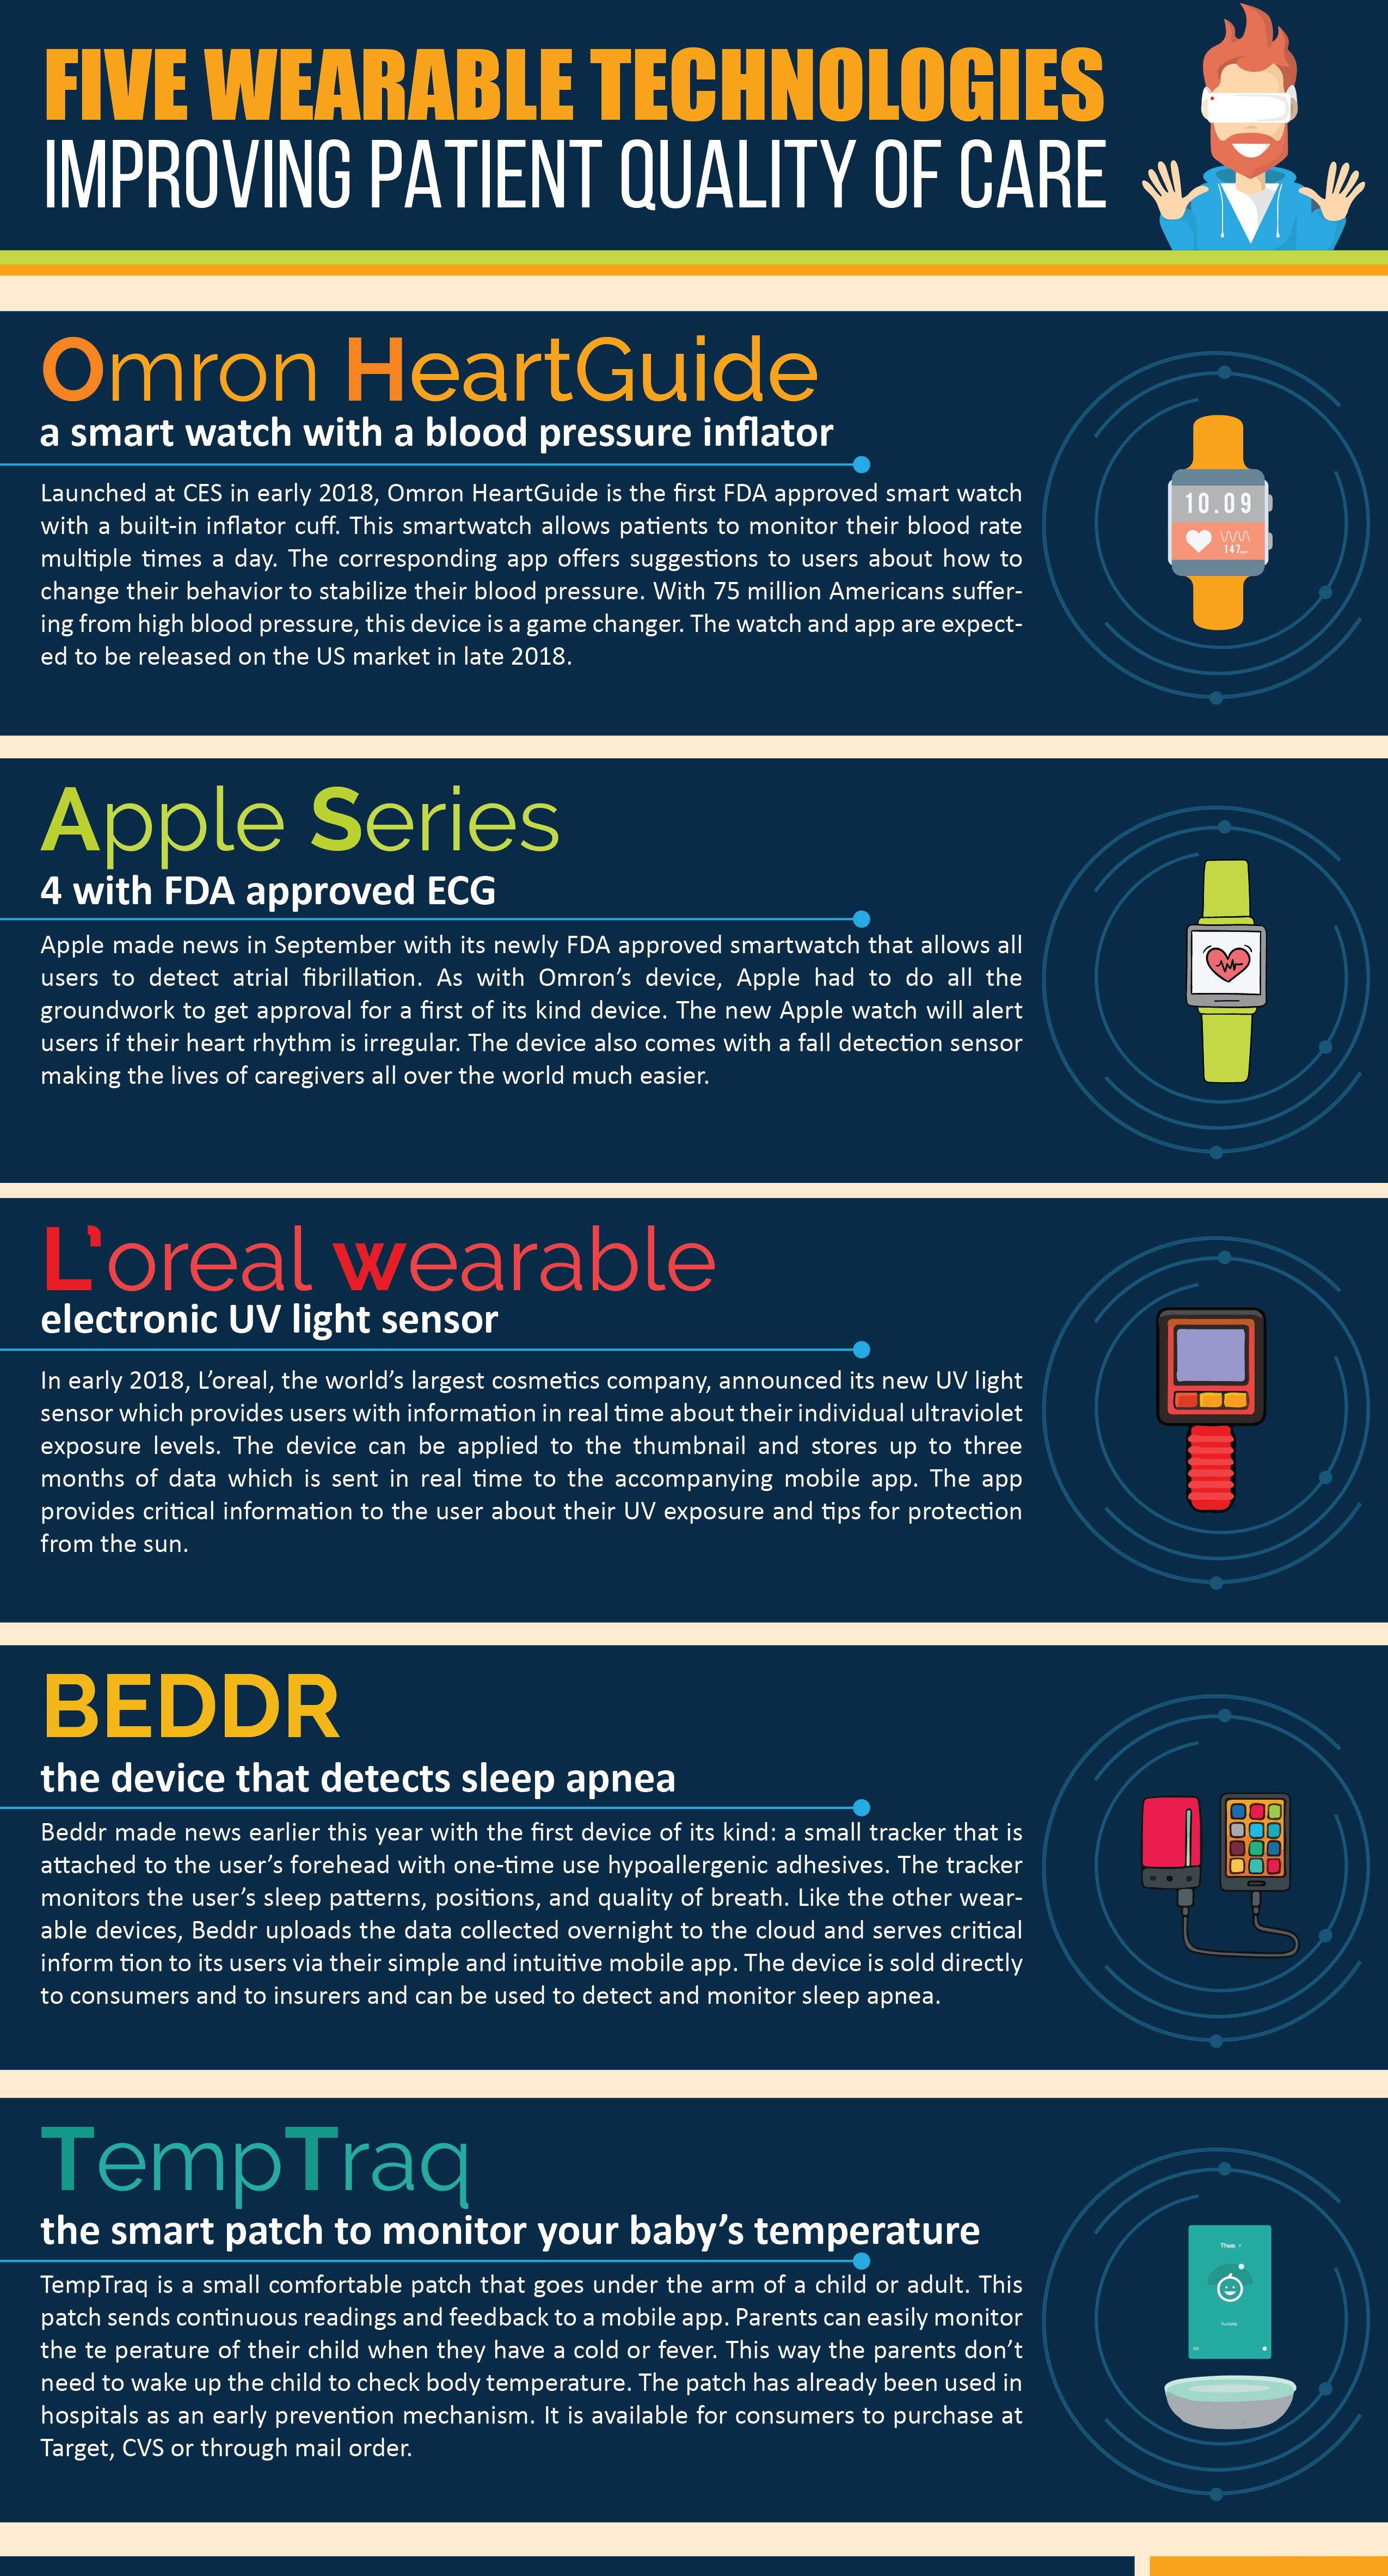 Infographic: 5 Wearable technologies improving patient quality of care